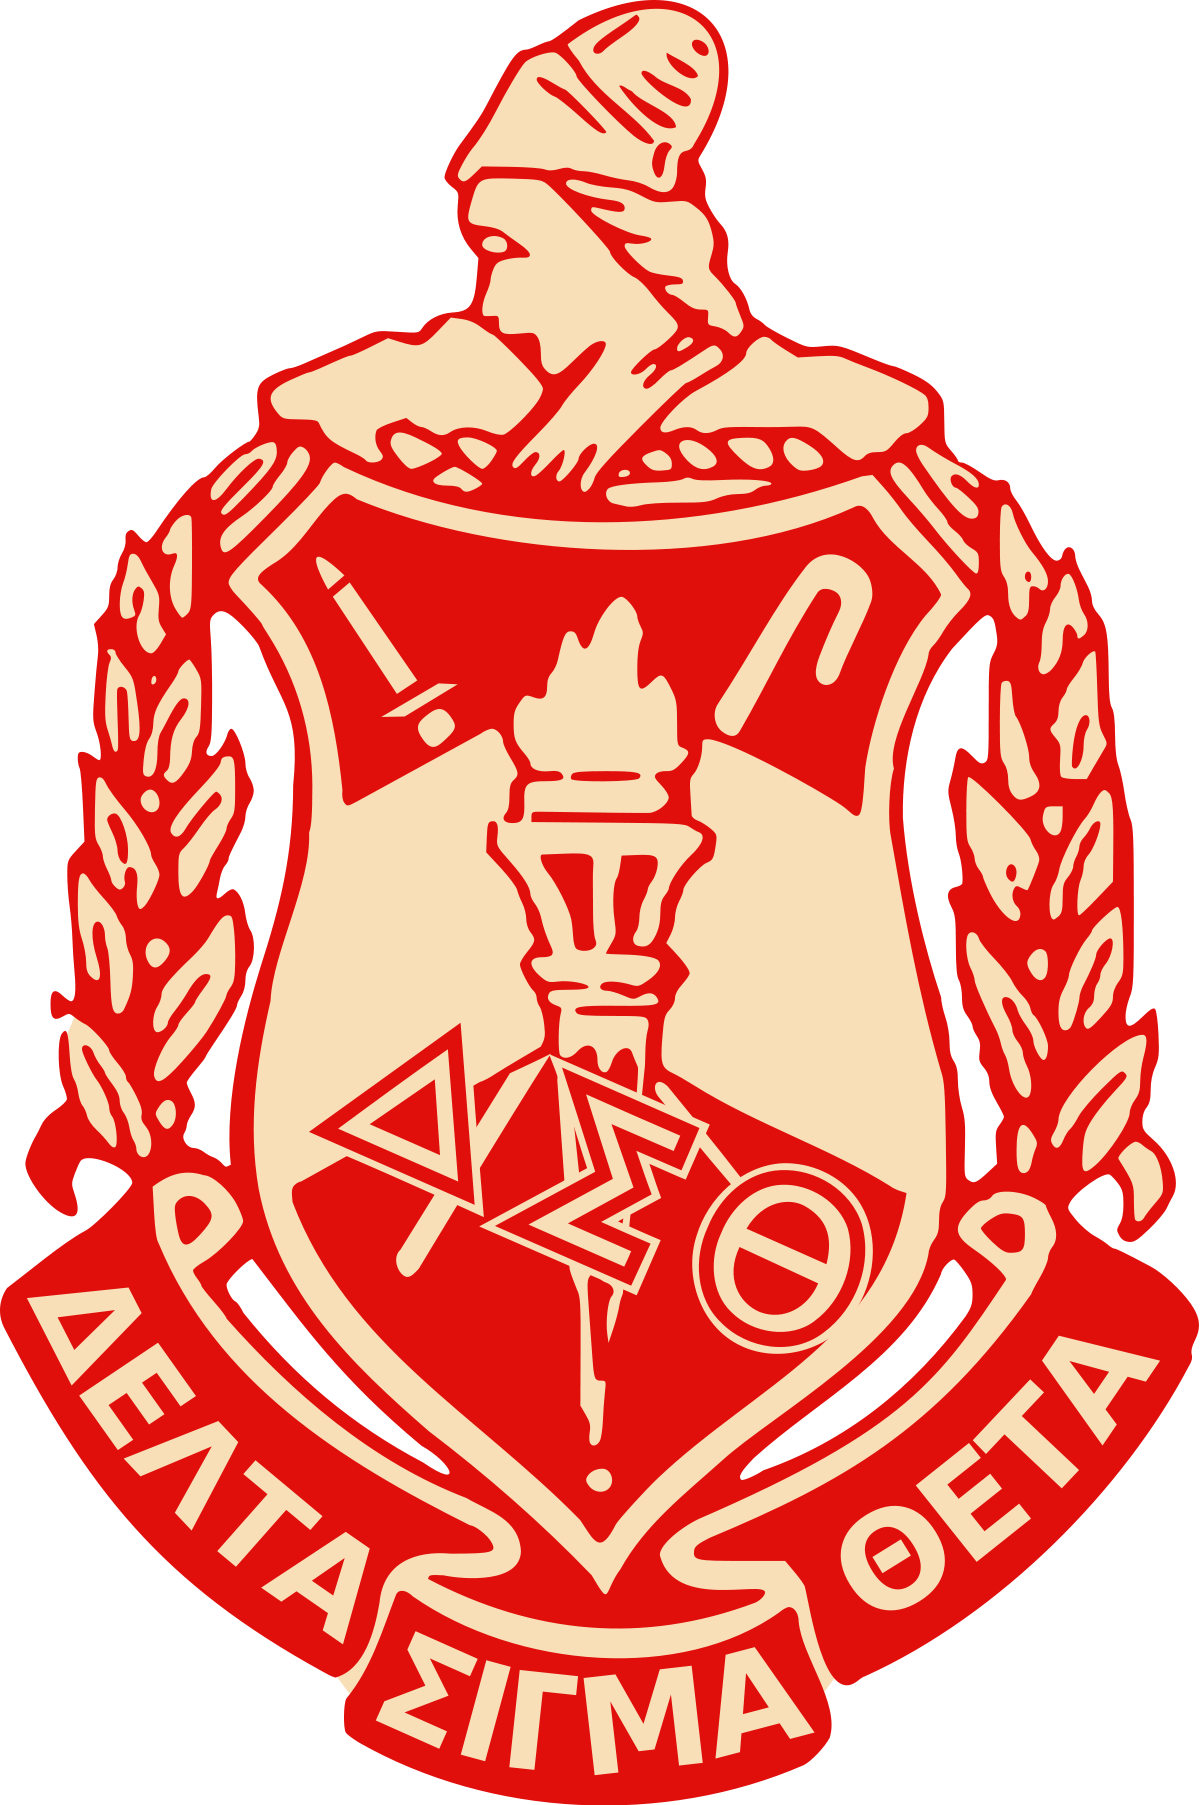 Delta Sigma Theta crest showing colors of red and white